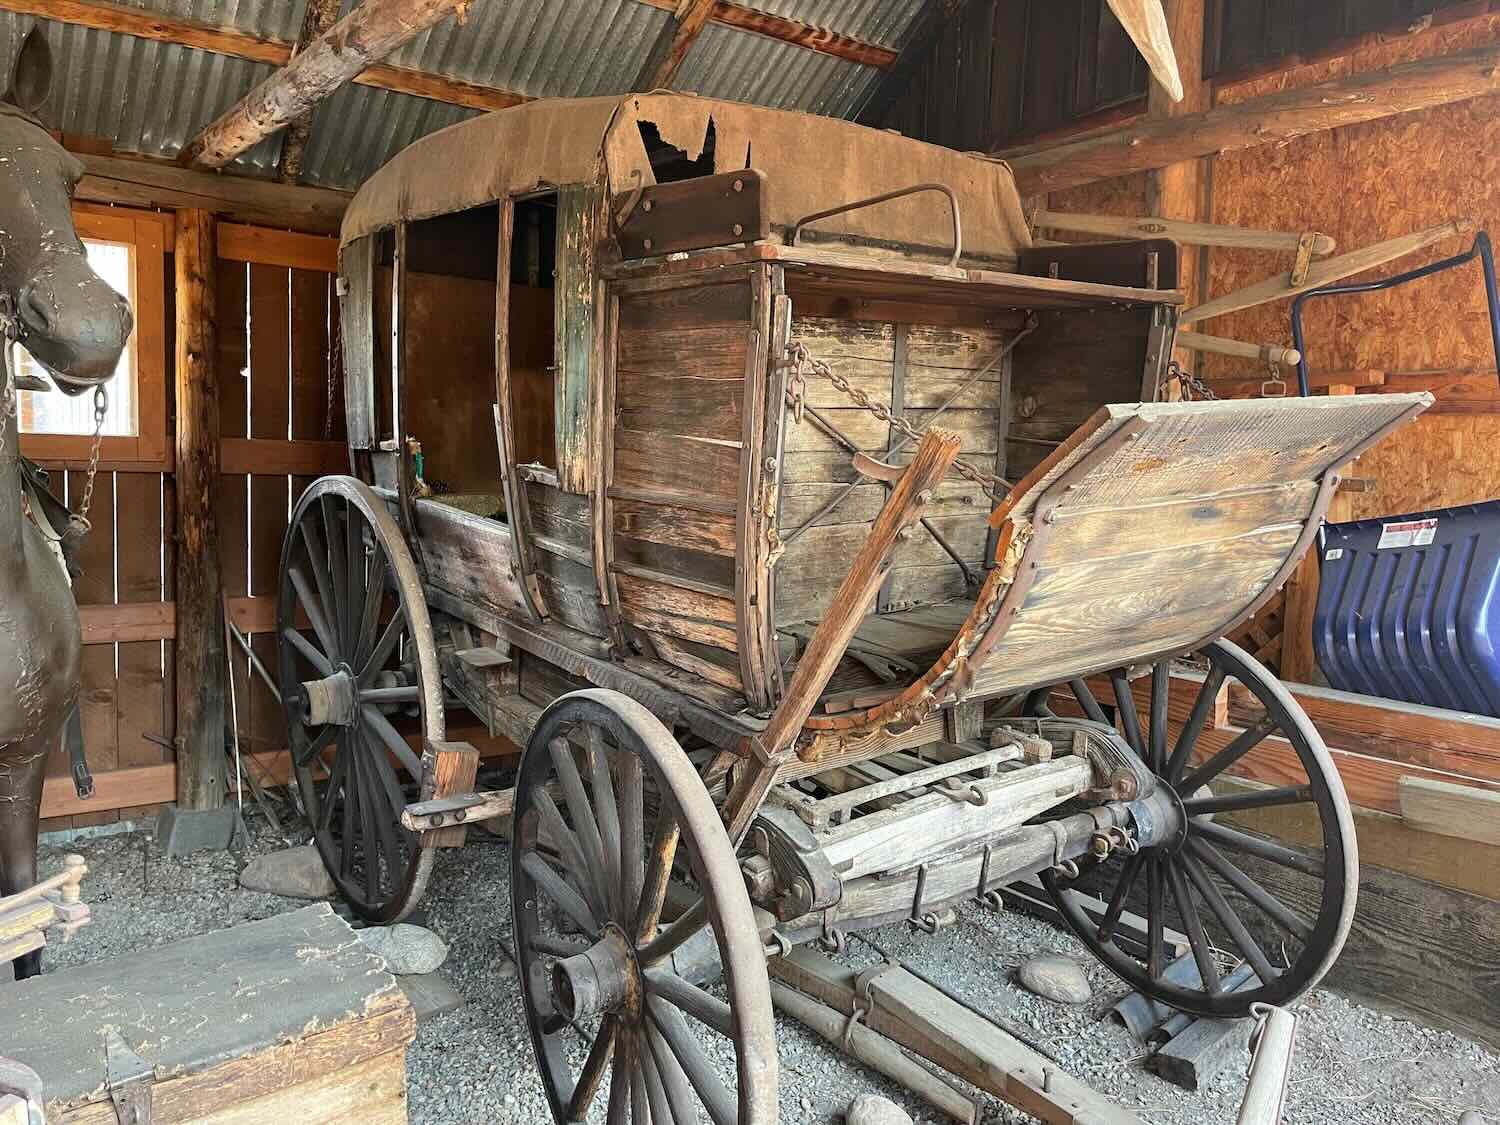 An old, wooden carriage on display at the history museum